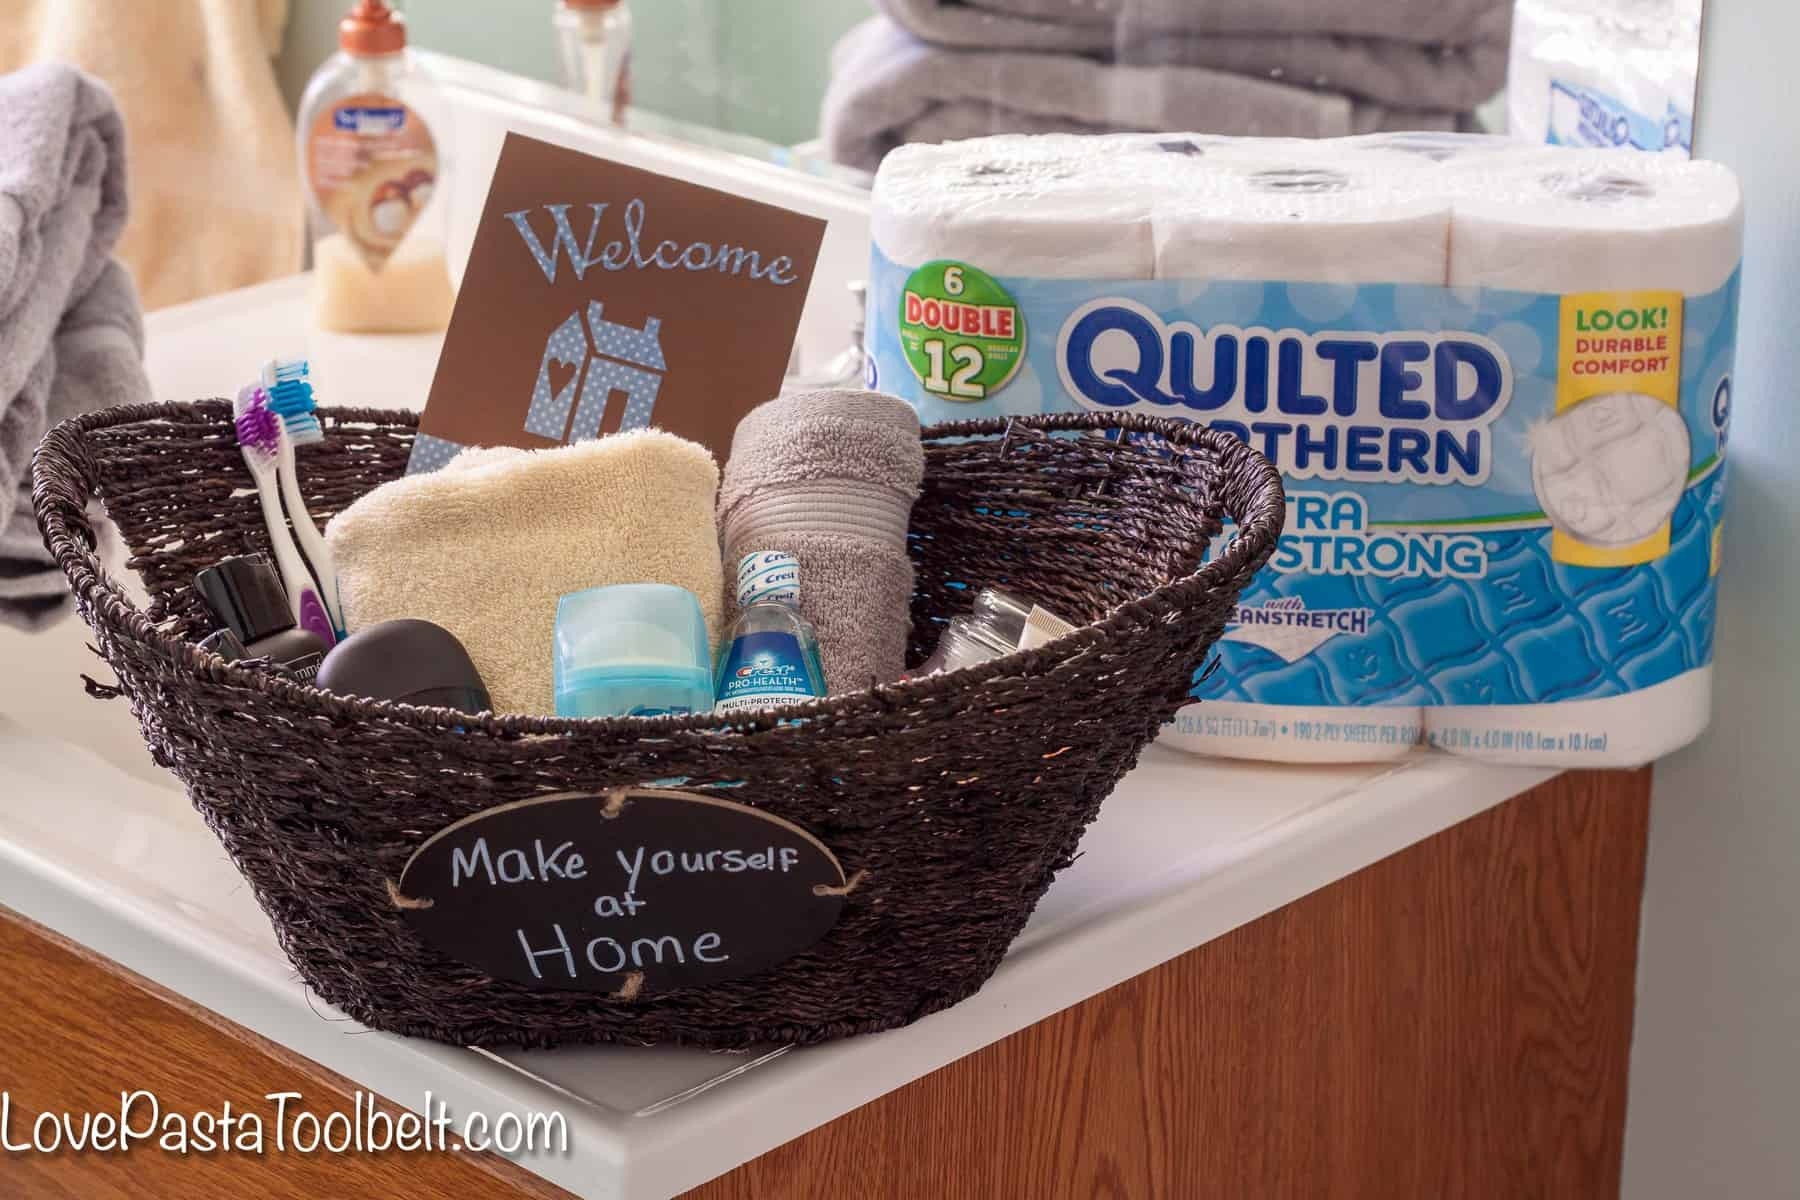 Welcome Gift Basket Ideas
 Guest Bathroom Wel e Basket Love Pasta and a Tool Belt